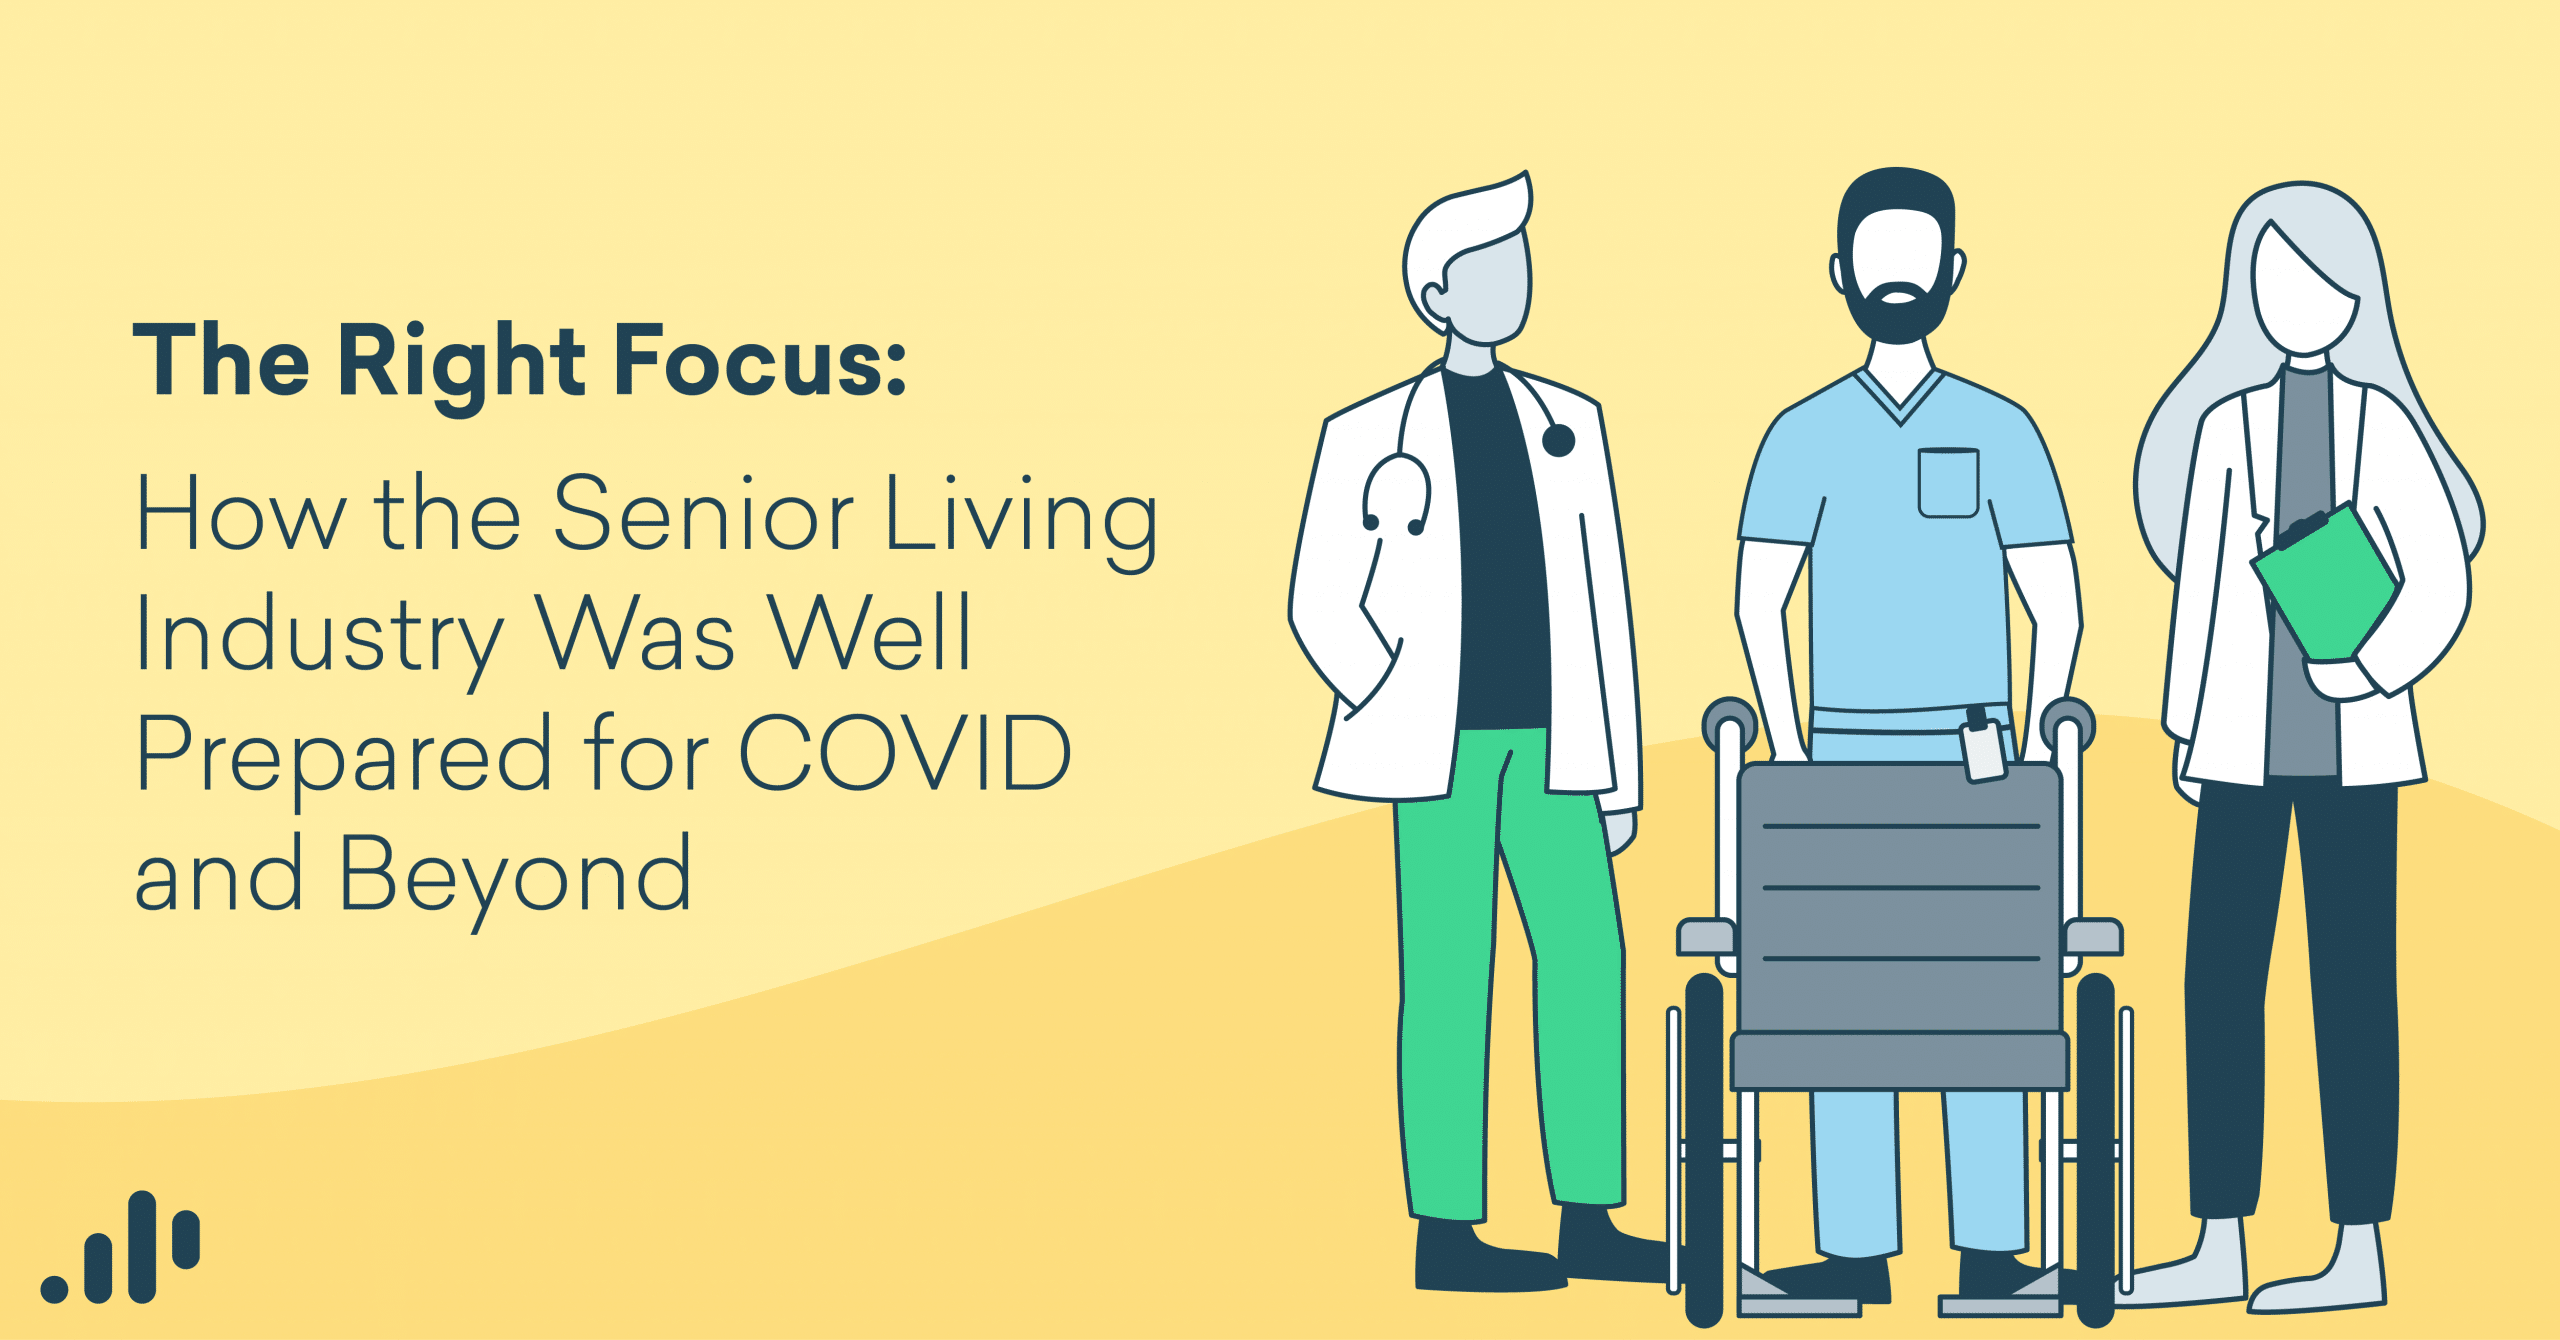 How the Senior Living Industry Was Well Prepared for COVID and Beyond